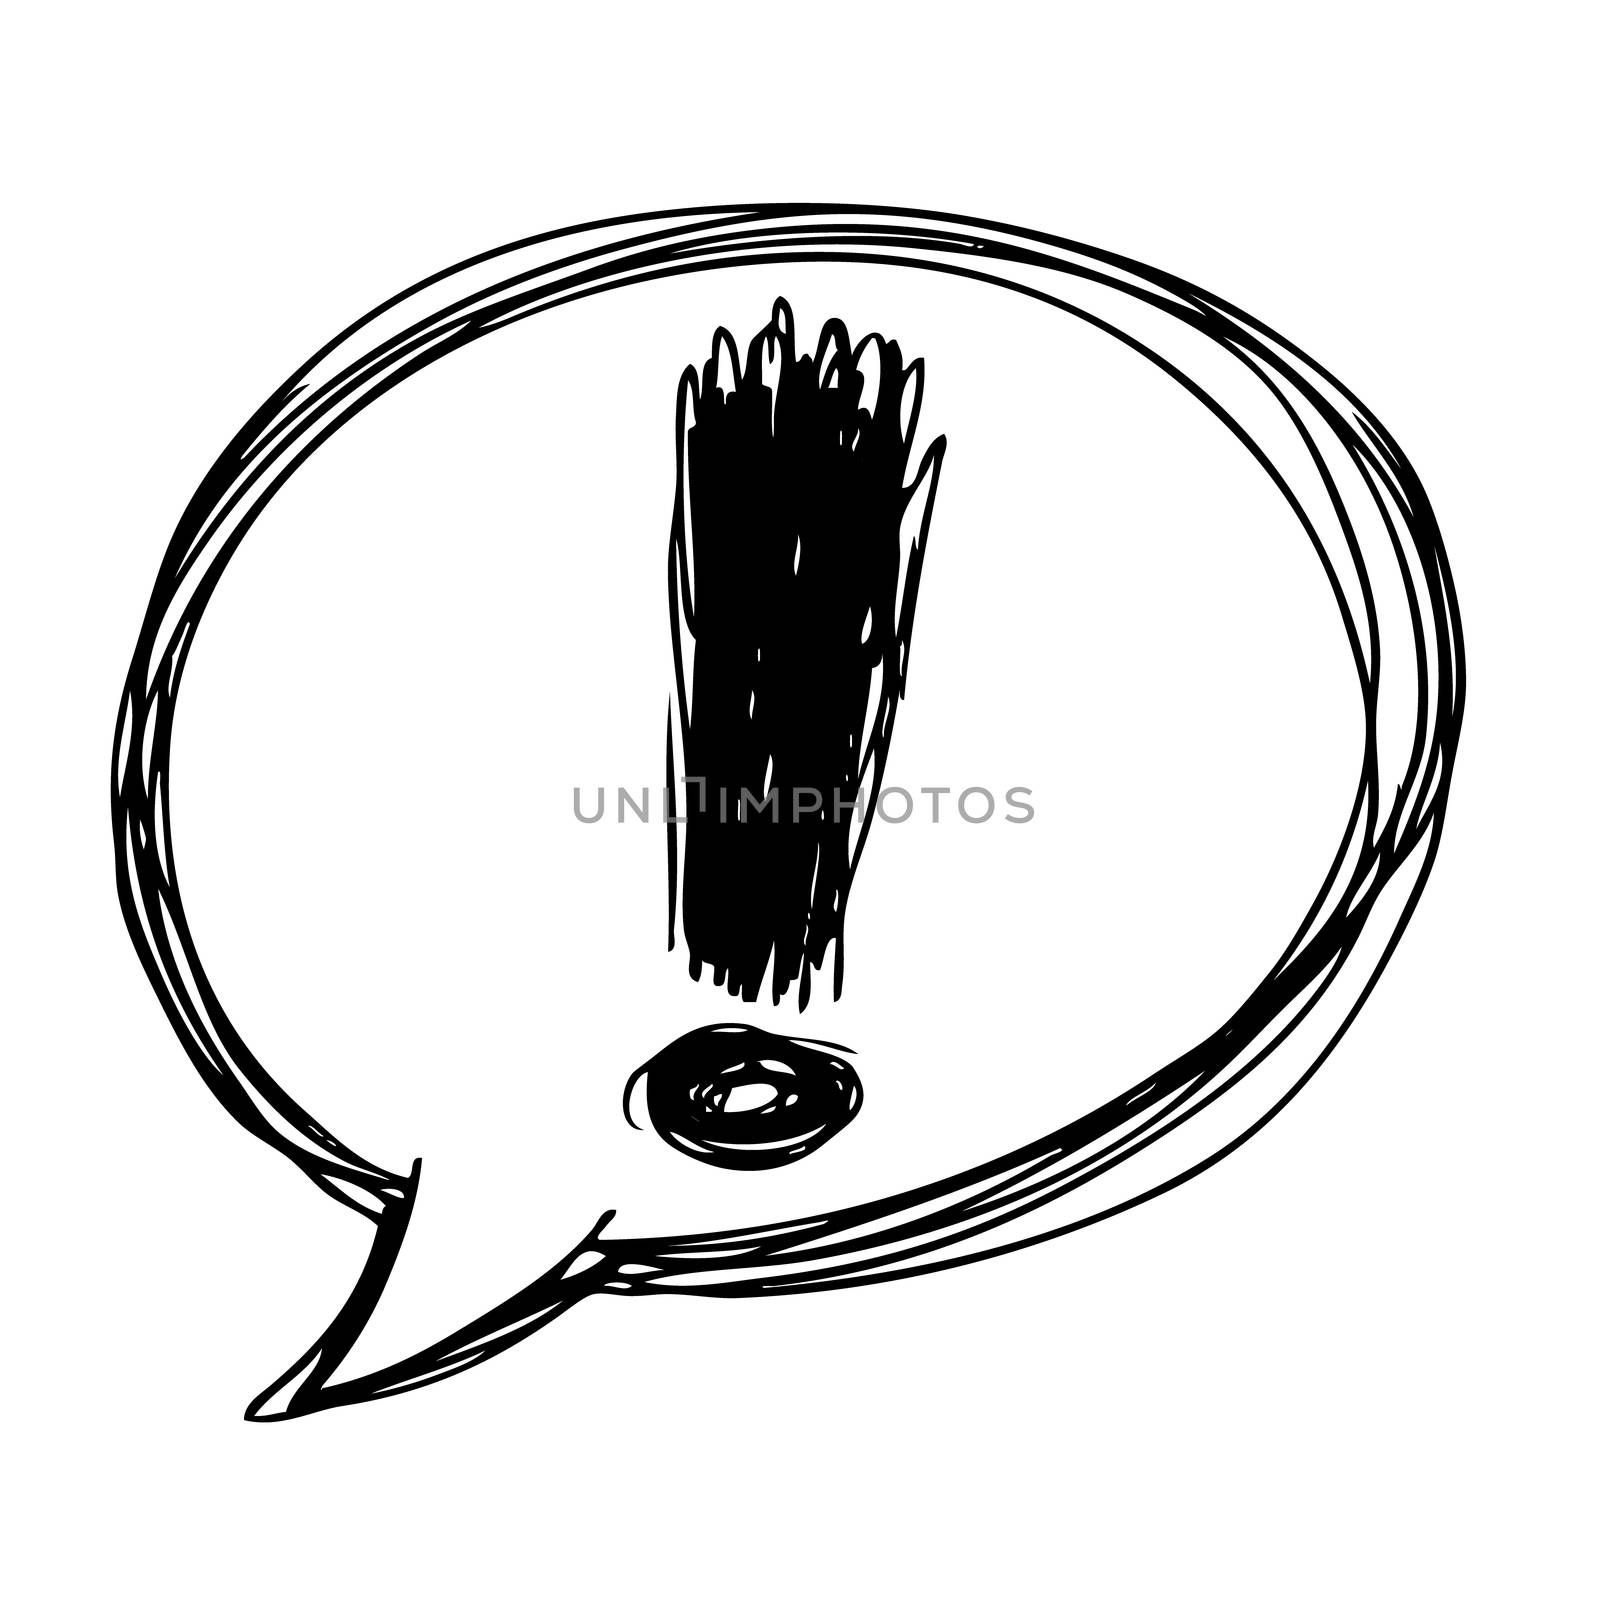 freehand sketch illustration of exclamation mark in speech bubble icon, doodle hand drawn